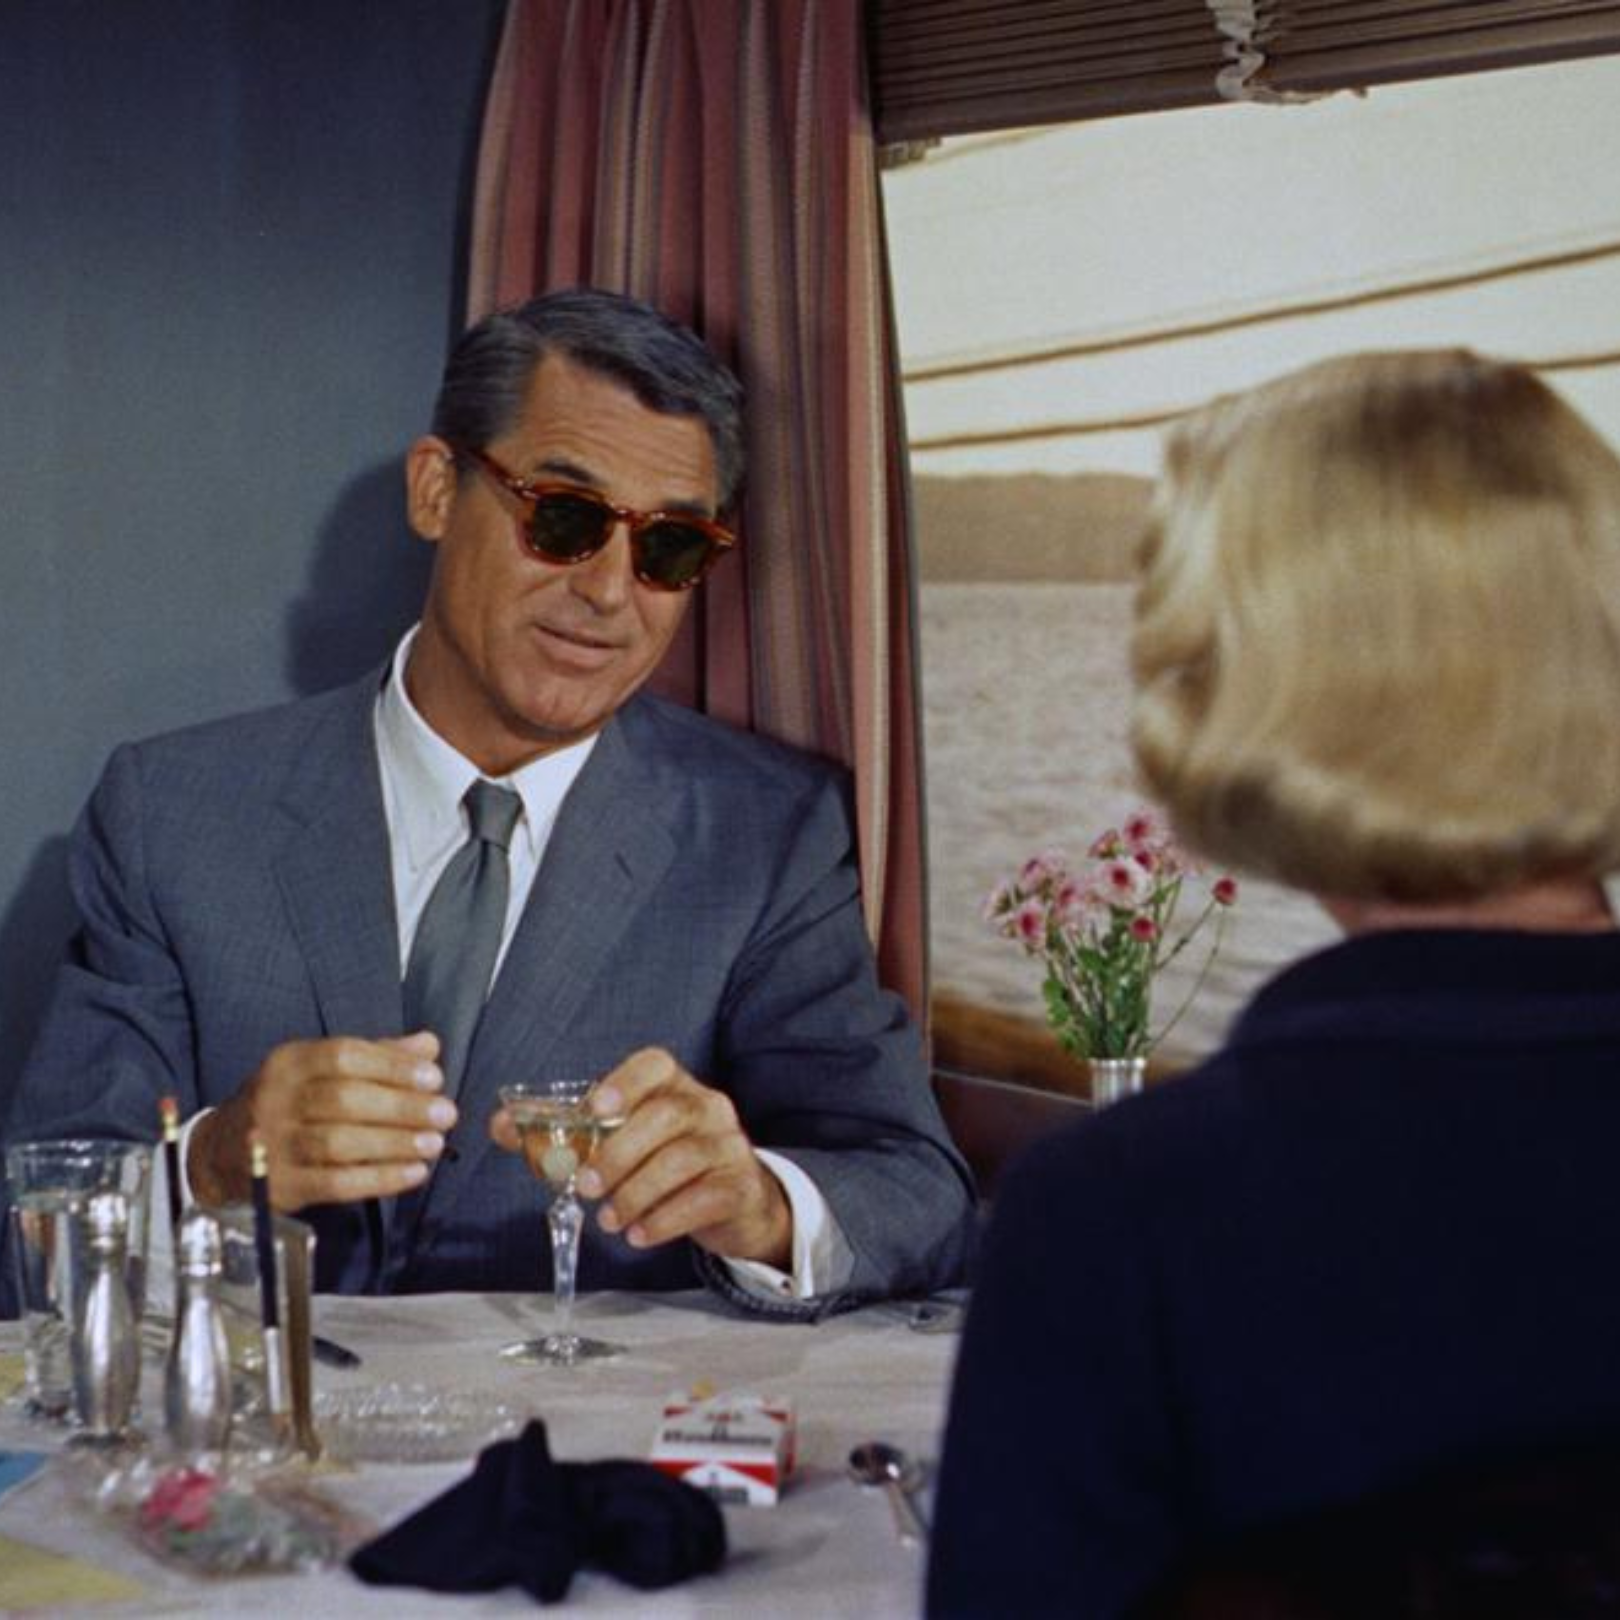 Oliver Peoples - Cary Grant